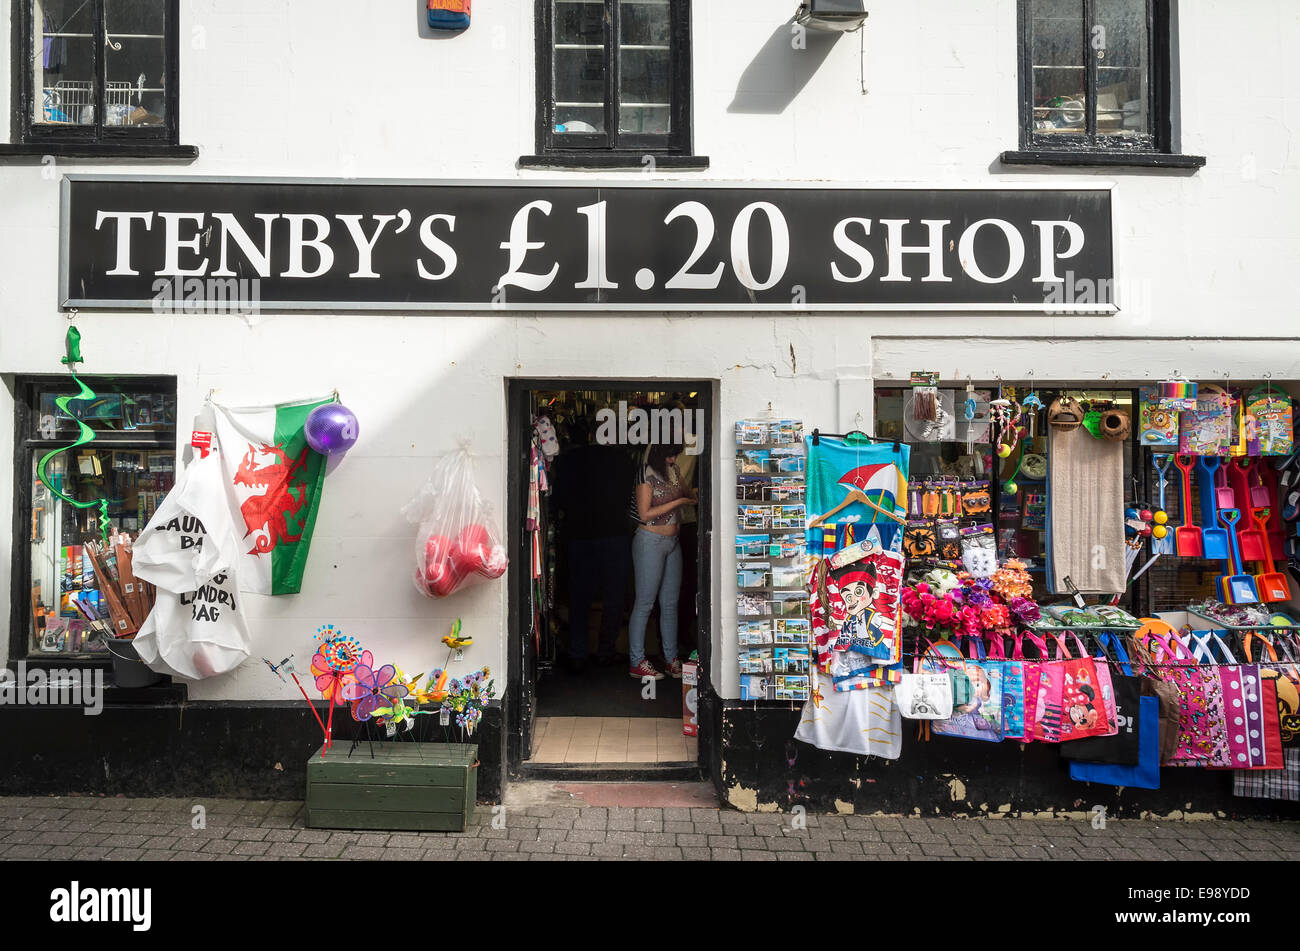 Tenby's £1.20 shop in Tenby South Wales UK Stock Photo - Alamy